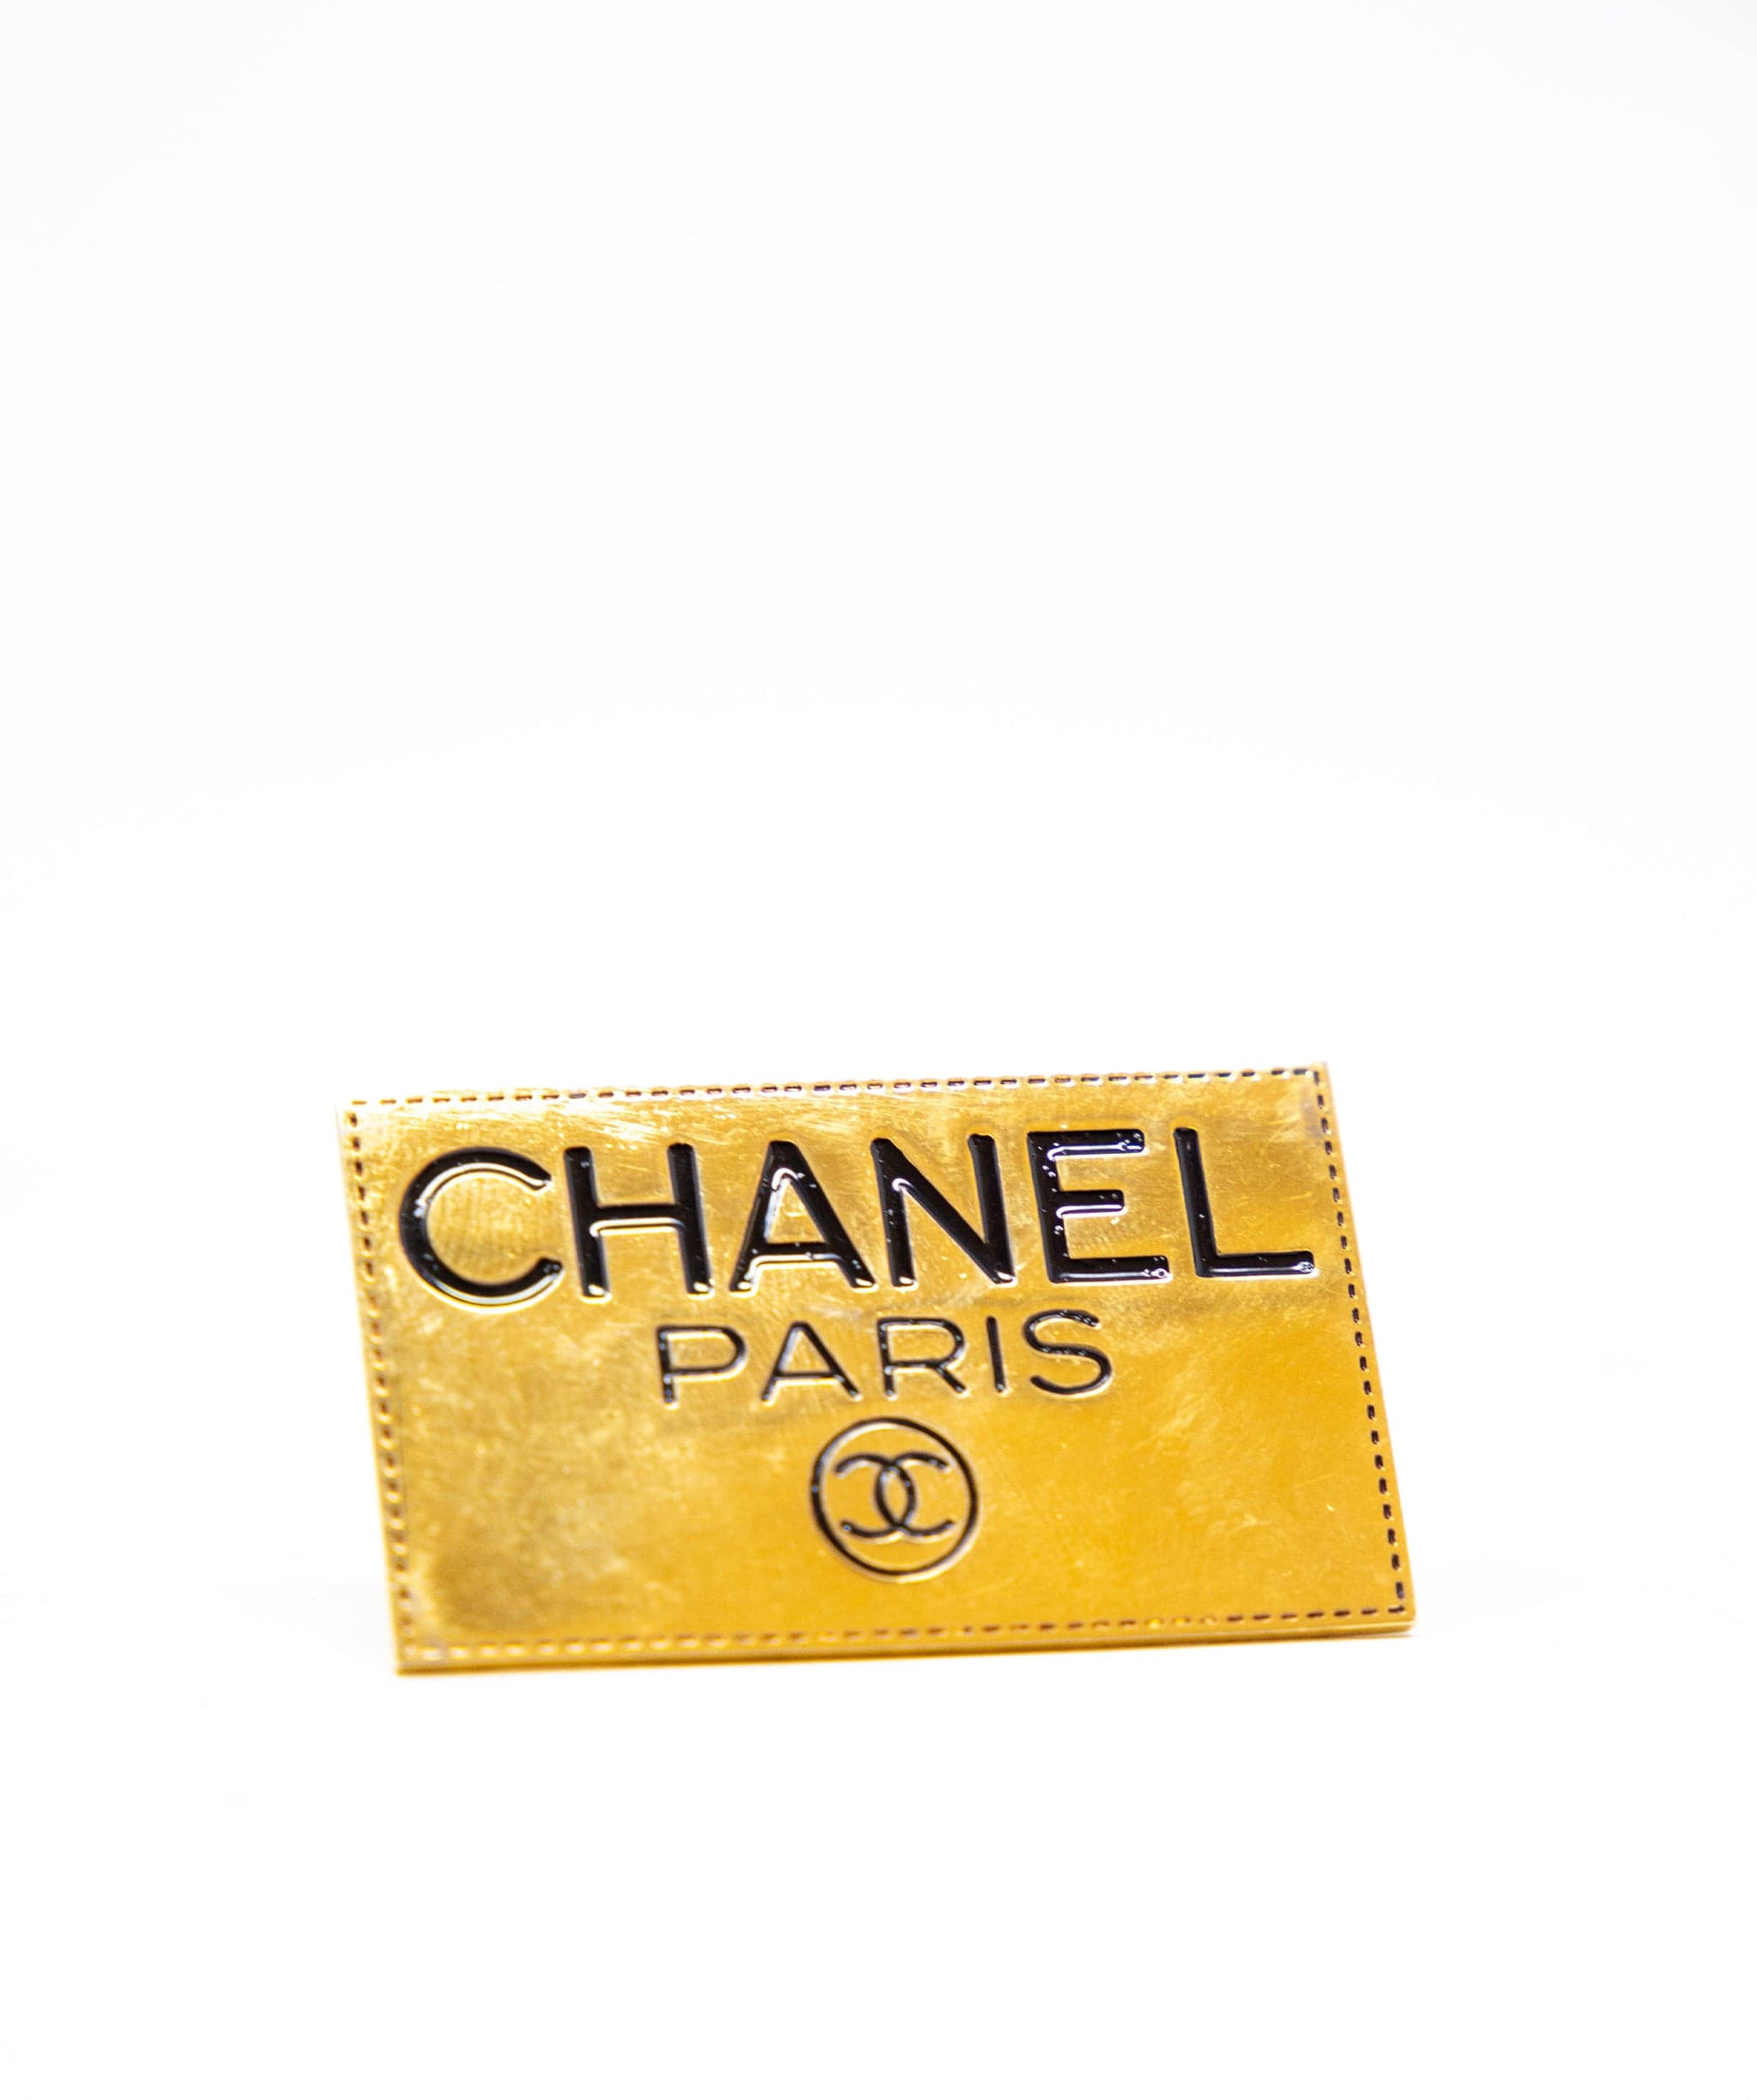 Chanel Chanel Gold Name Tag Brooch - AWL2277